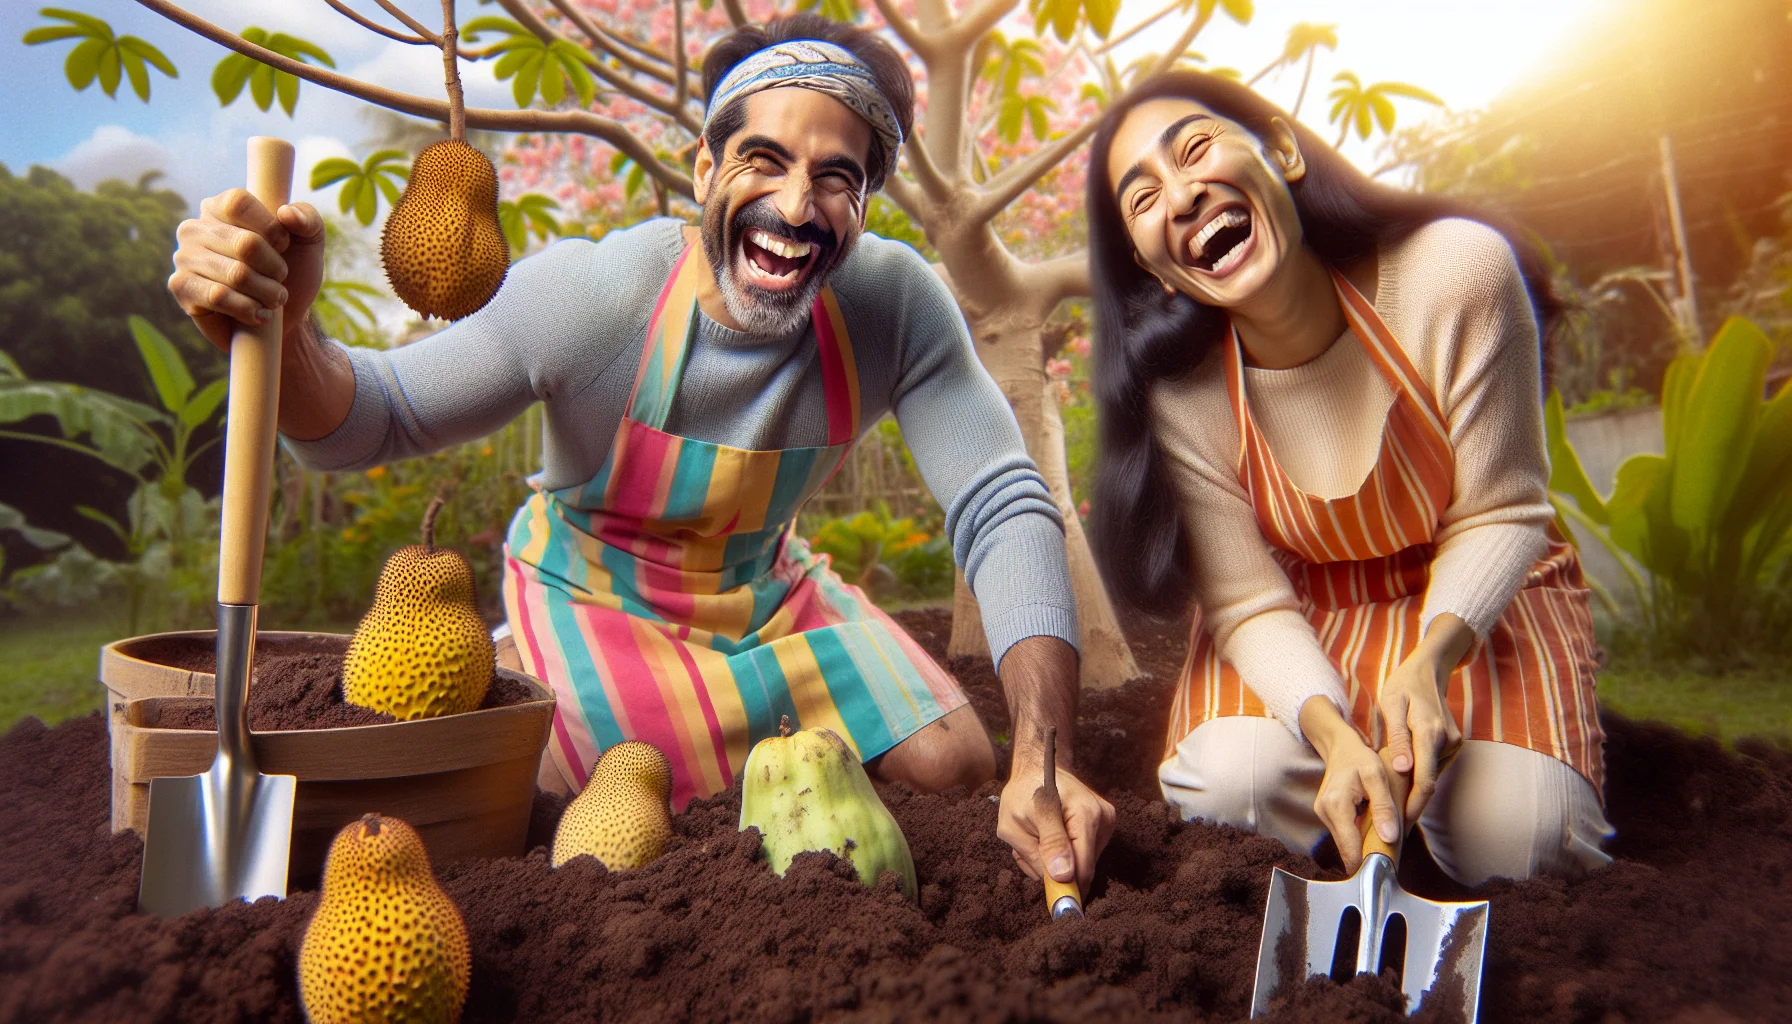 Create a playful and humorous image showing a group of people thoroughly enjoying gardening. Show a Hispanic man and a Middle-Eastern woman, both wearing colorful aprons, laughing as they dig in the soil and plant pawpaw trees. Include the intriguing shapes of pawpaw fruits and trees in the background. Accentuate the earthy, sunlit ambiance of a blossoming garden. The joy of gardening and the allure of growing pawpaws should be vividly conveyed.